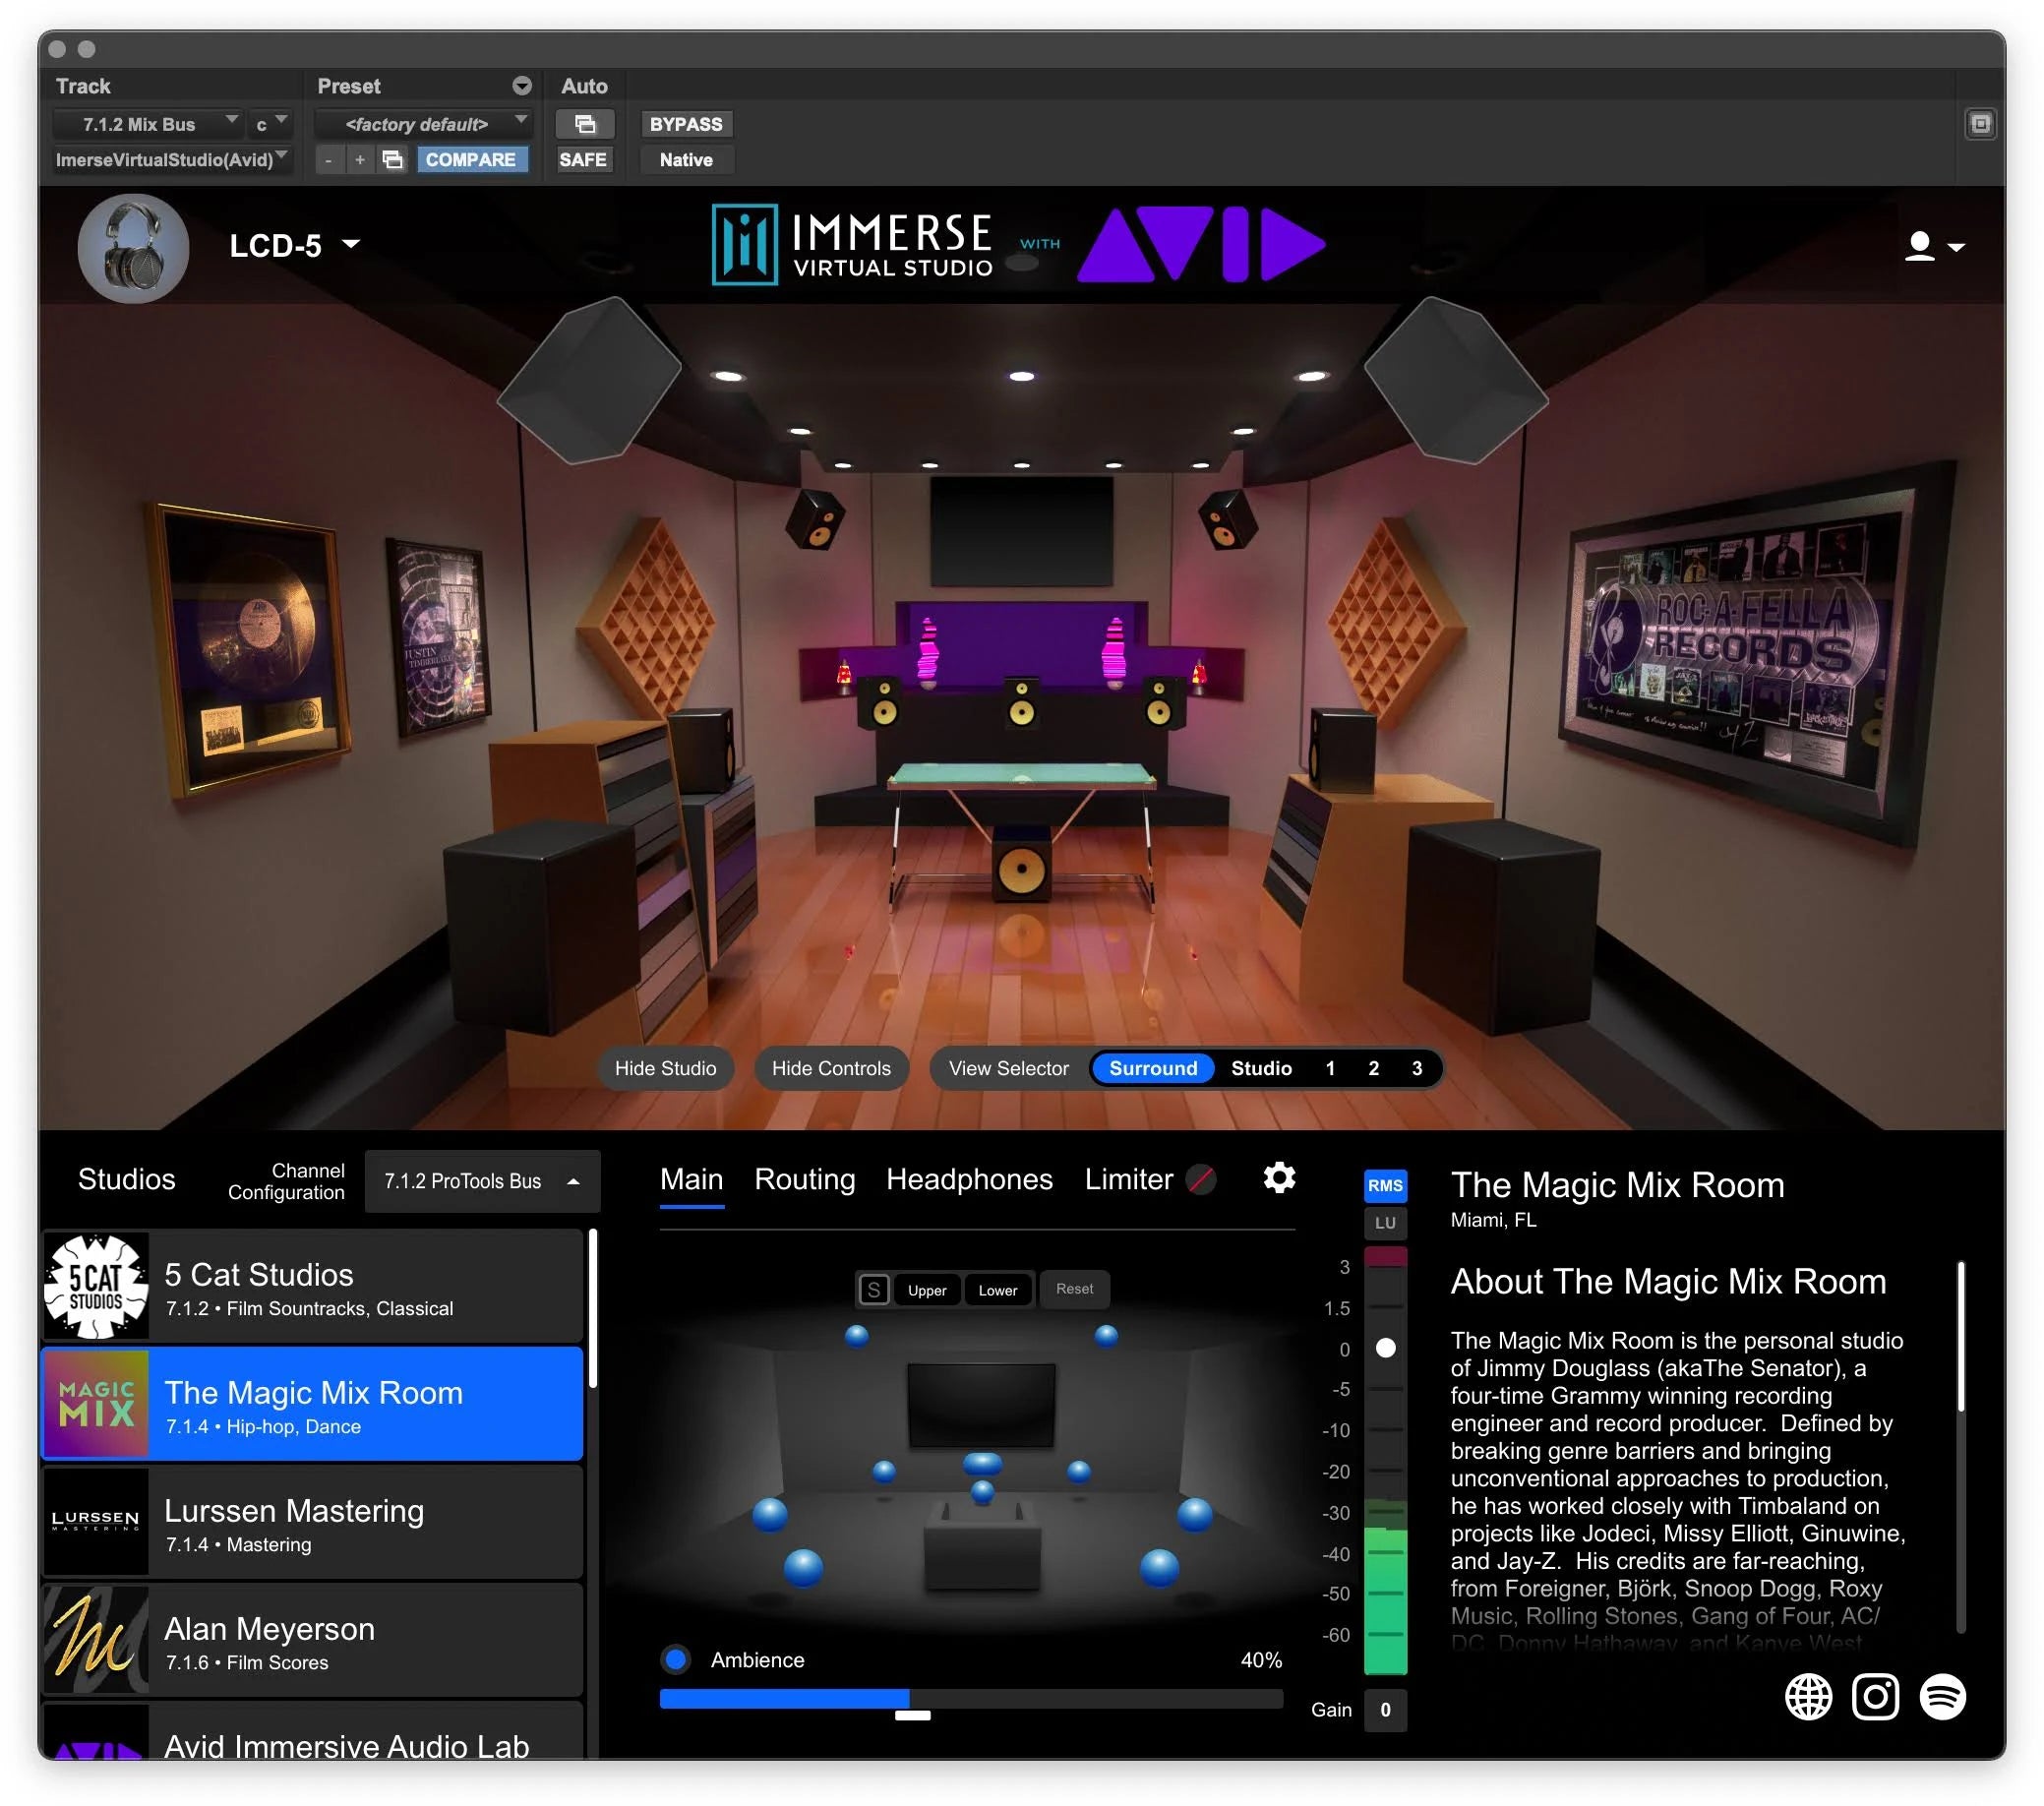 Embody Immerse Spatial Audio Production Suite